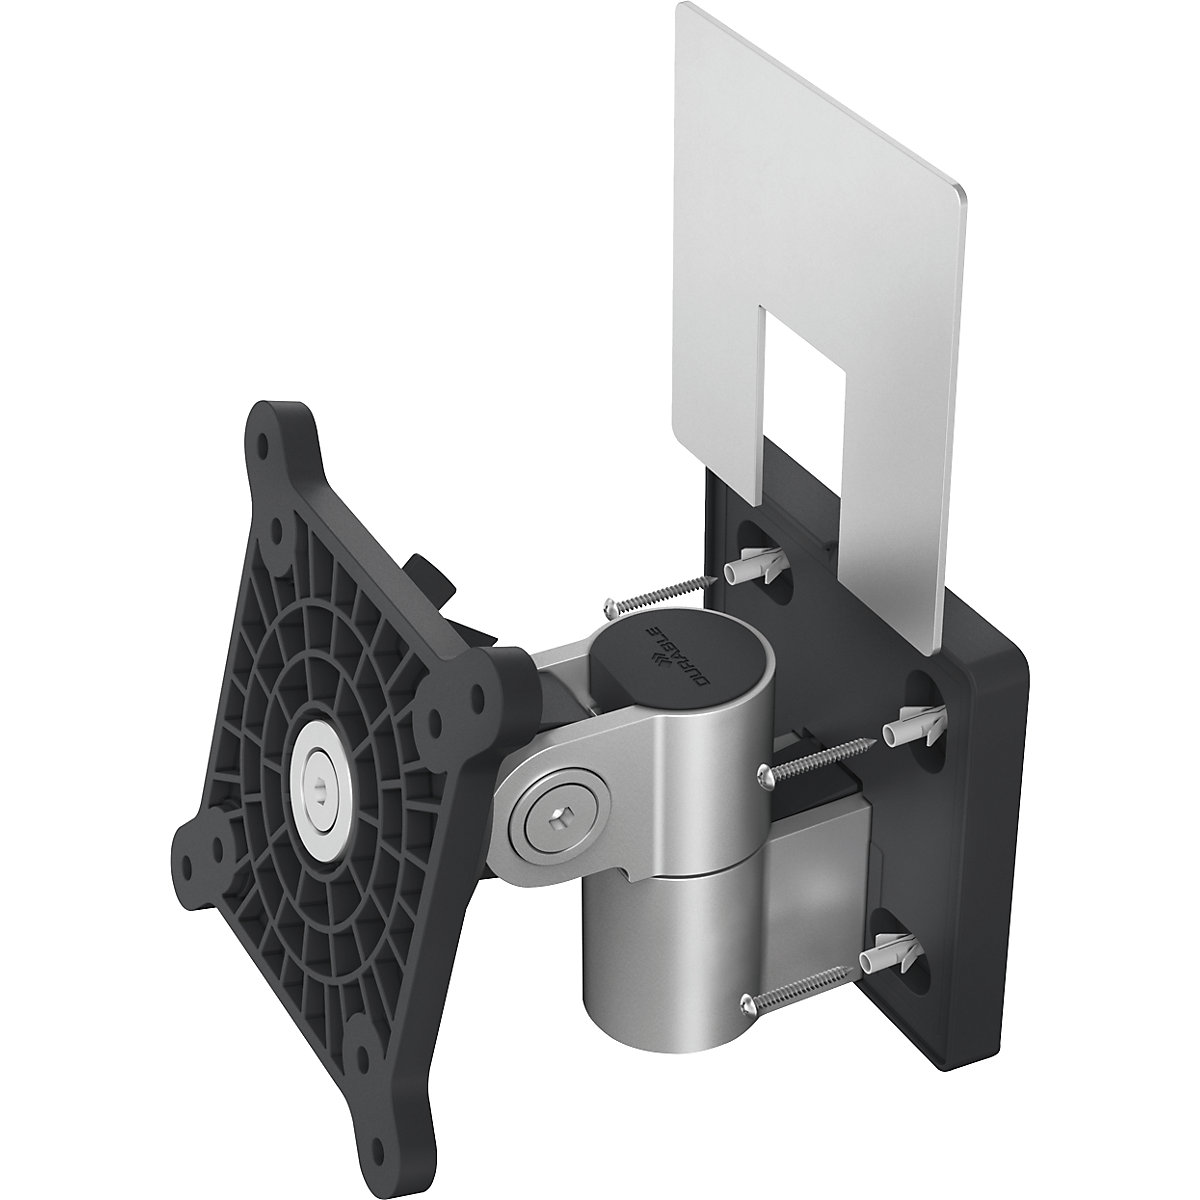 Monitor wall mounting bracket for 1 monitor - DURABLE